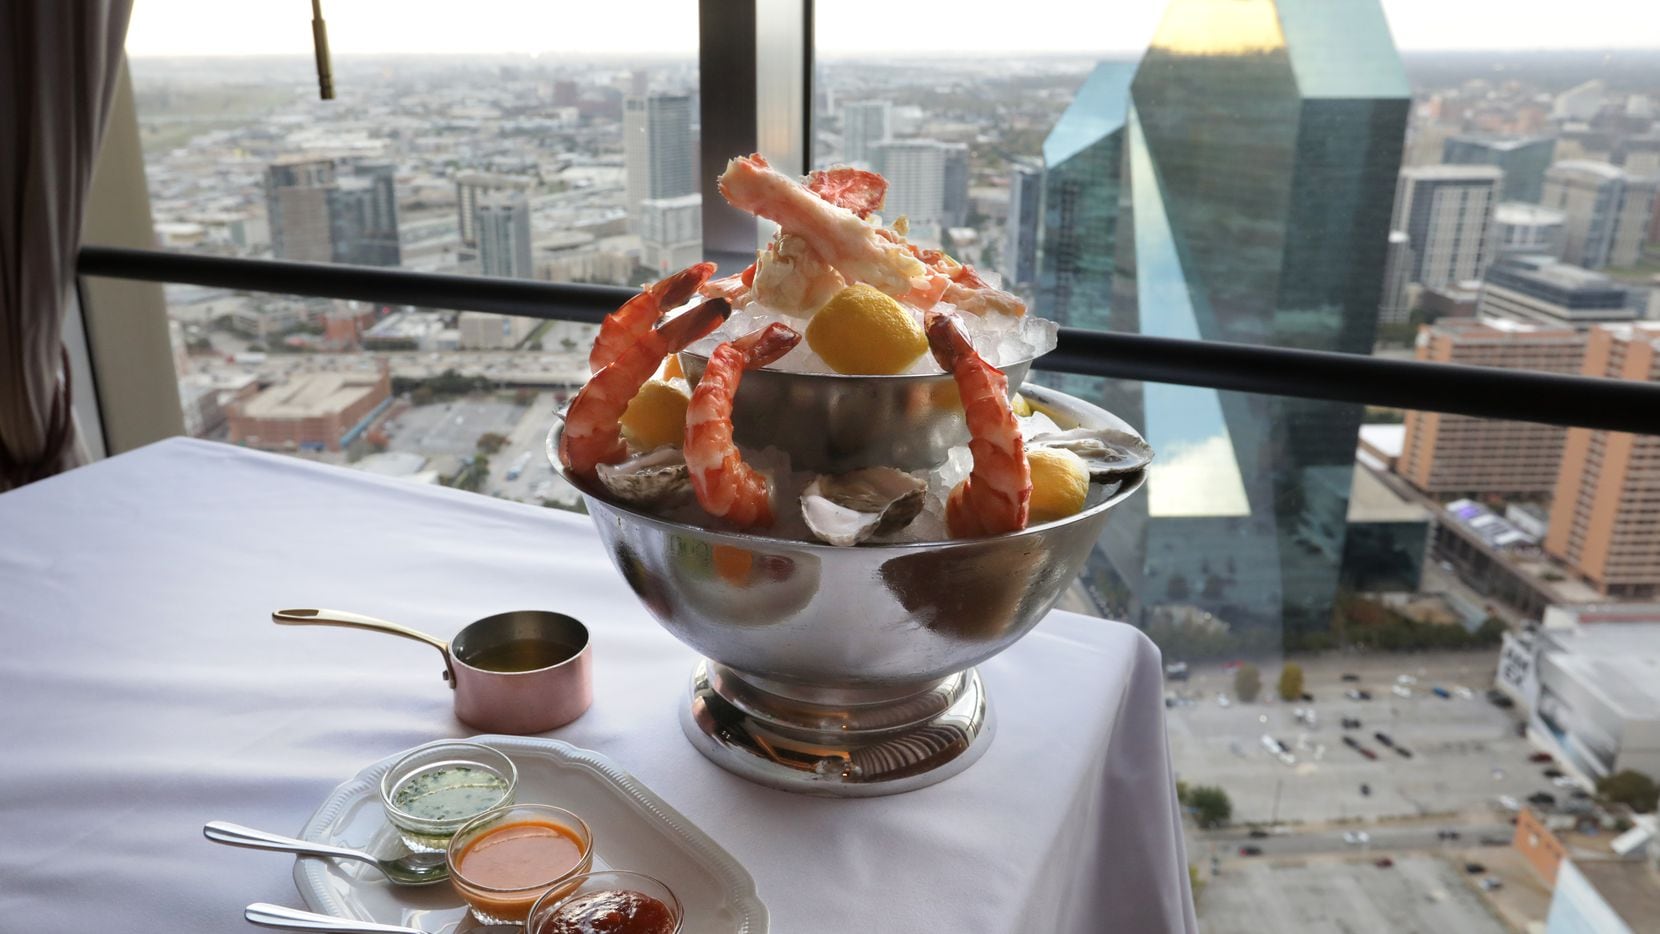 Dinner with a view: That's Monarch, one of the fanciest new restaurants in Dallas.